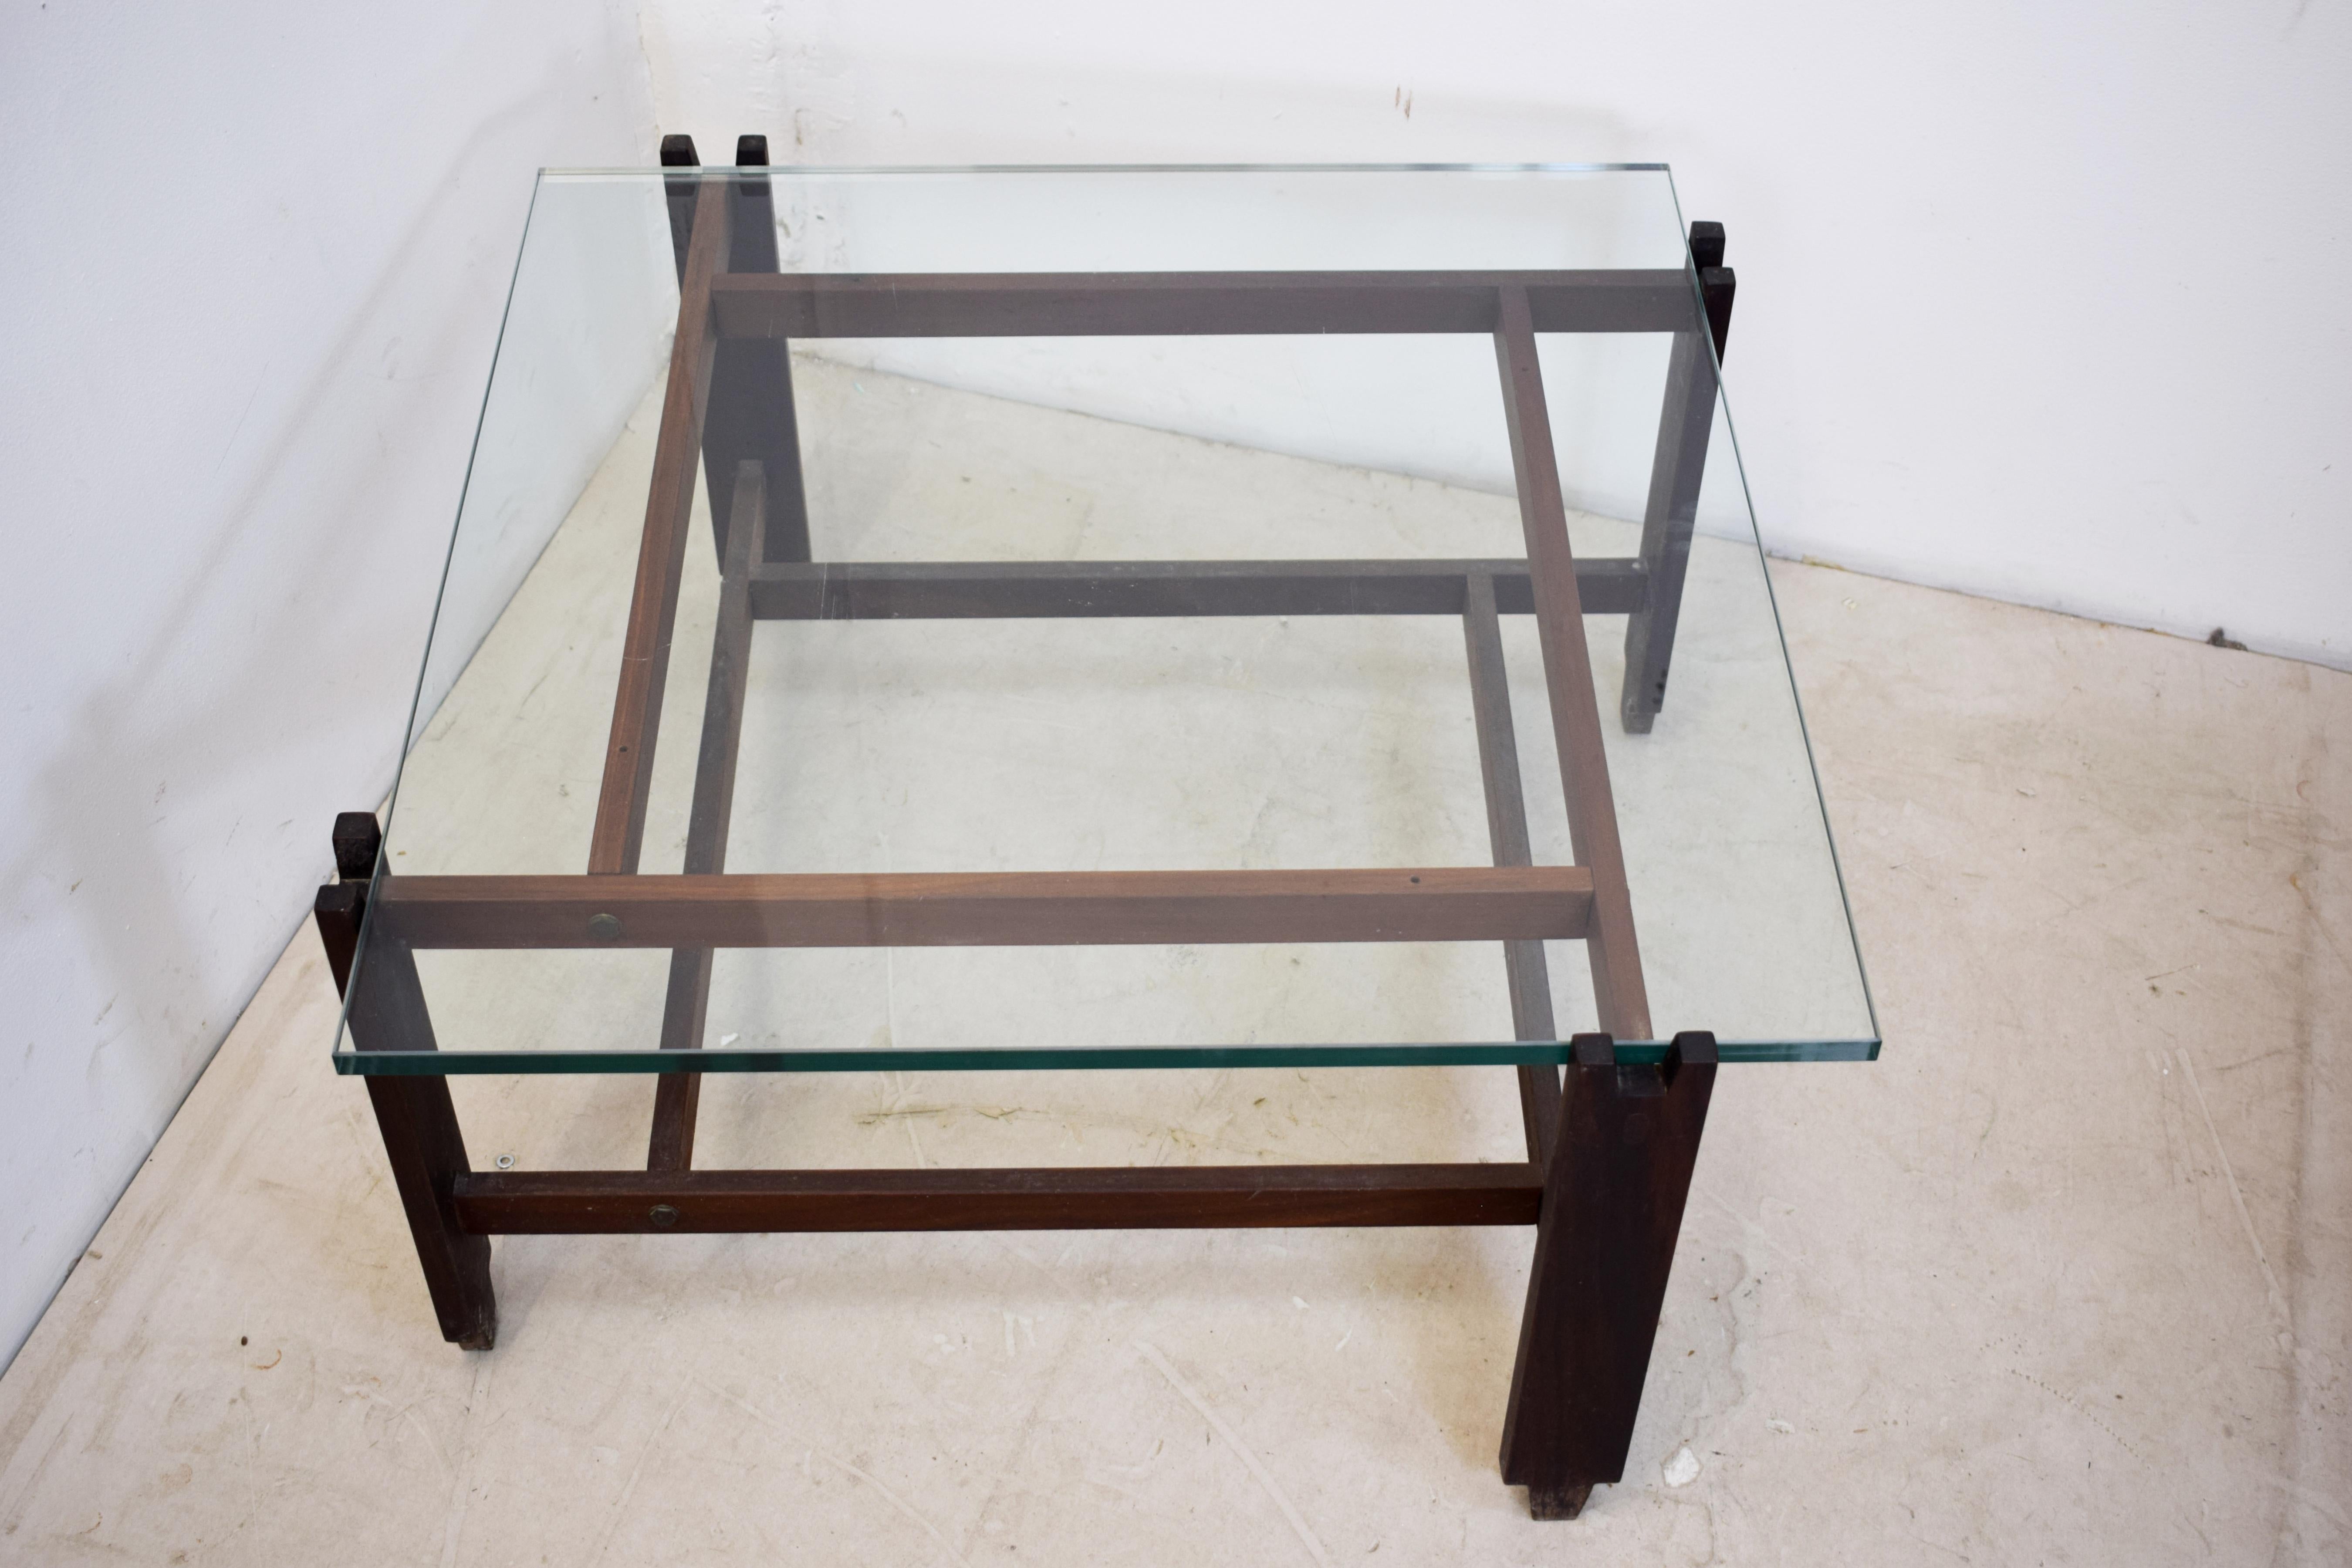 Italian coffe table, wood and glass, 1960s.
Dimensions: H= 35 cm; W= 67 cm; D= 67 cm.